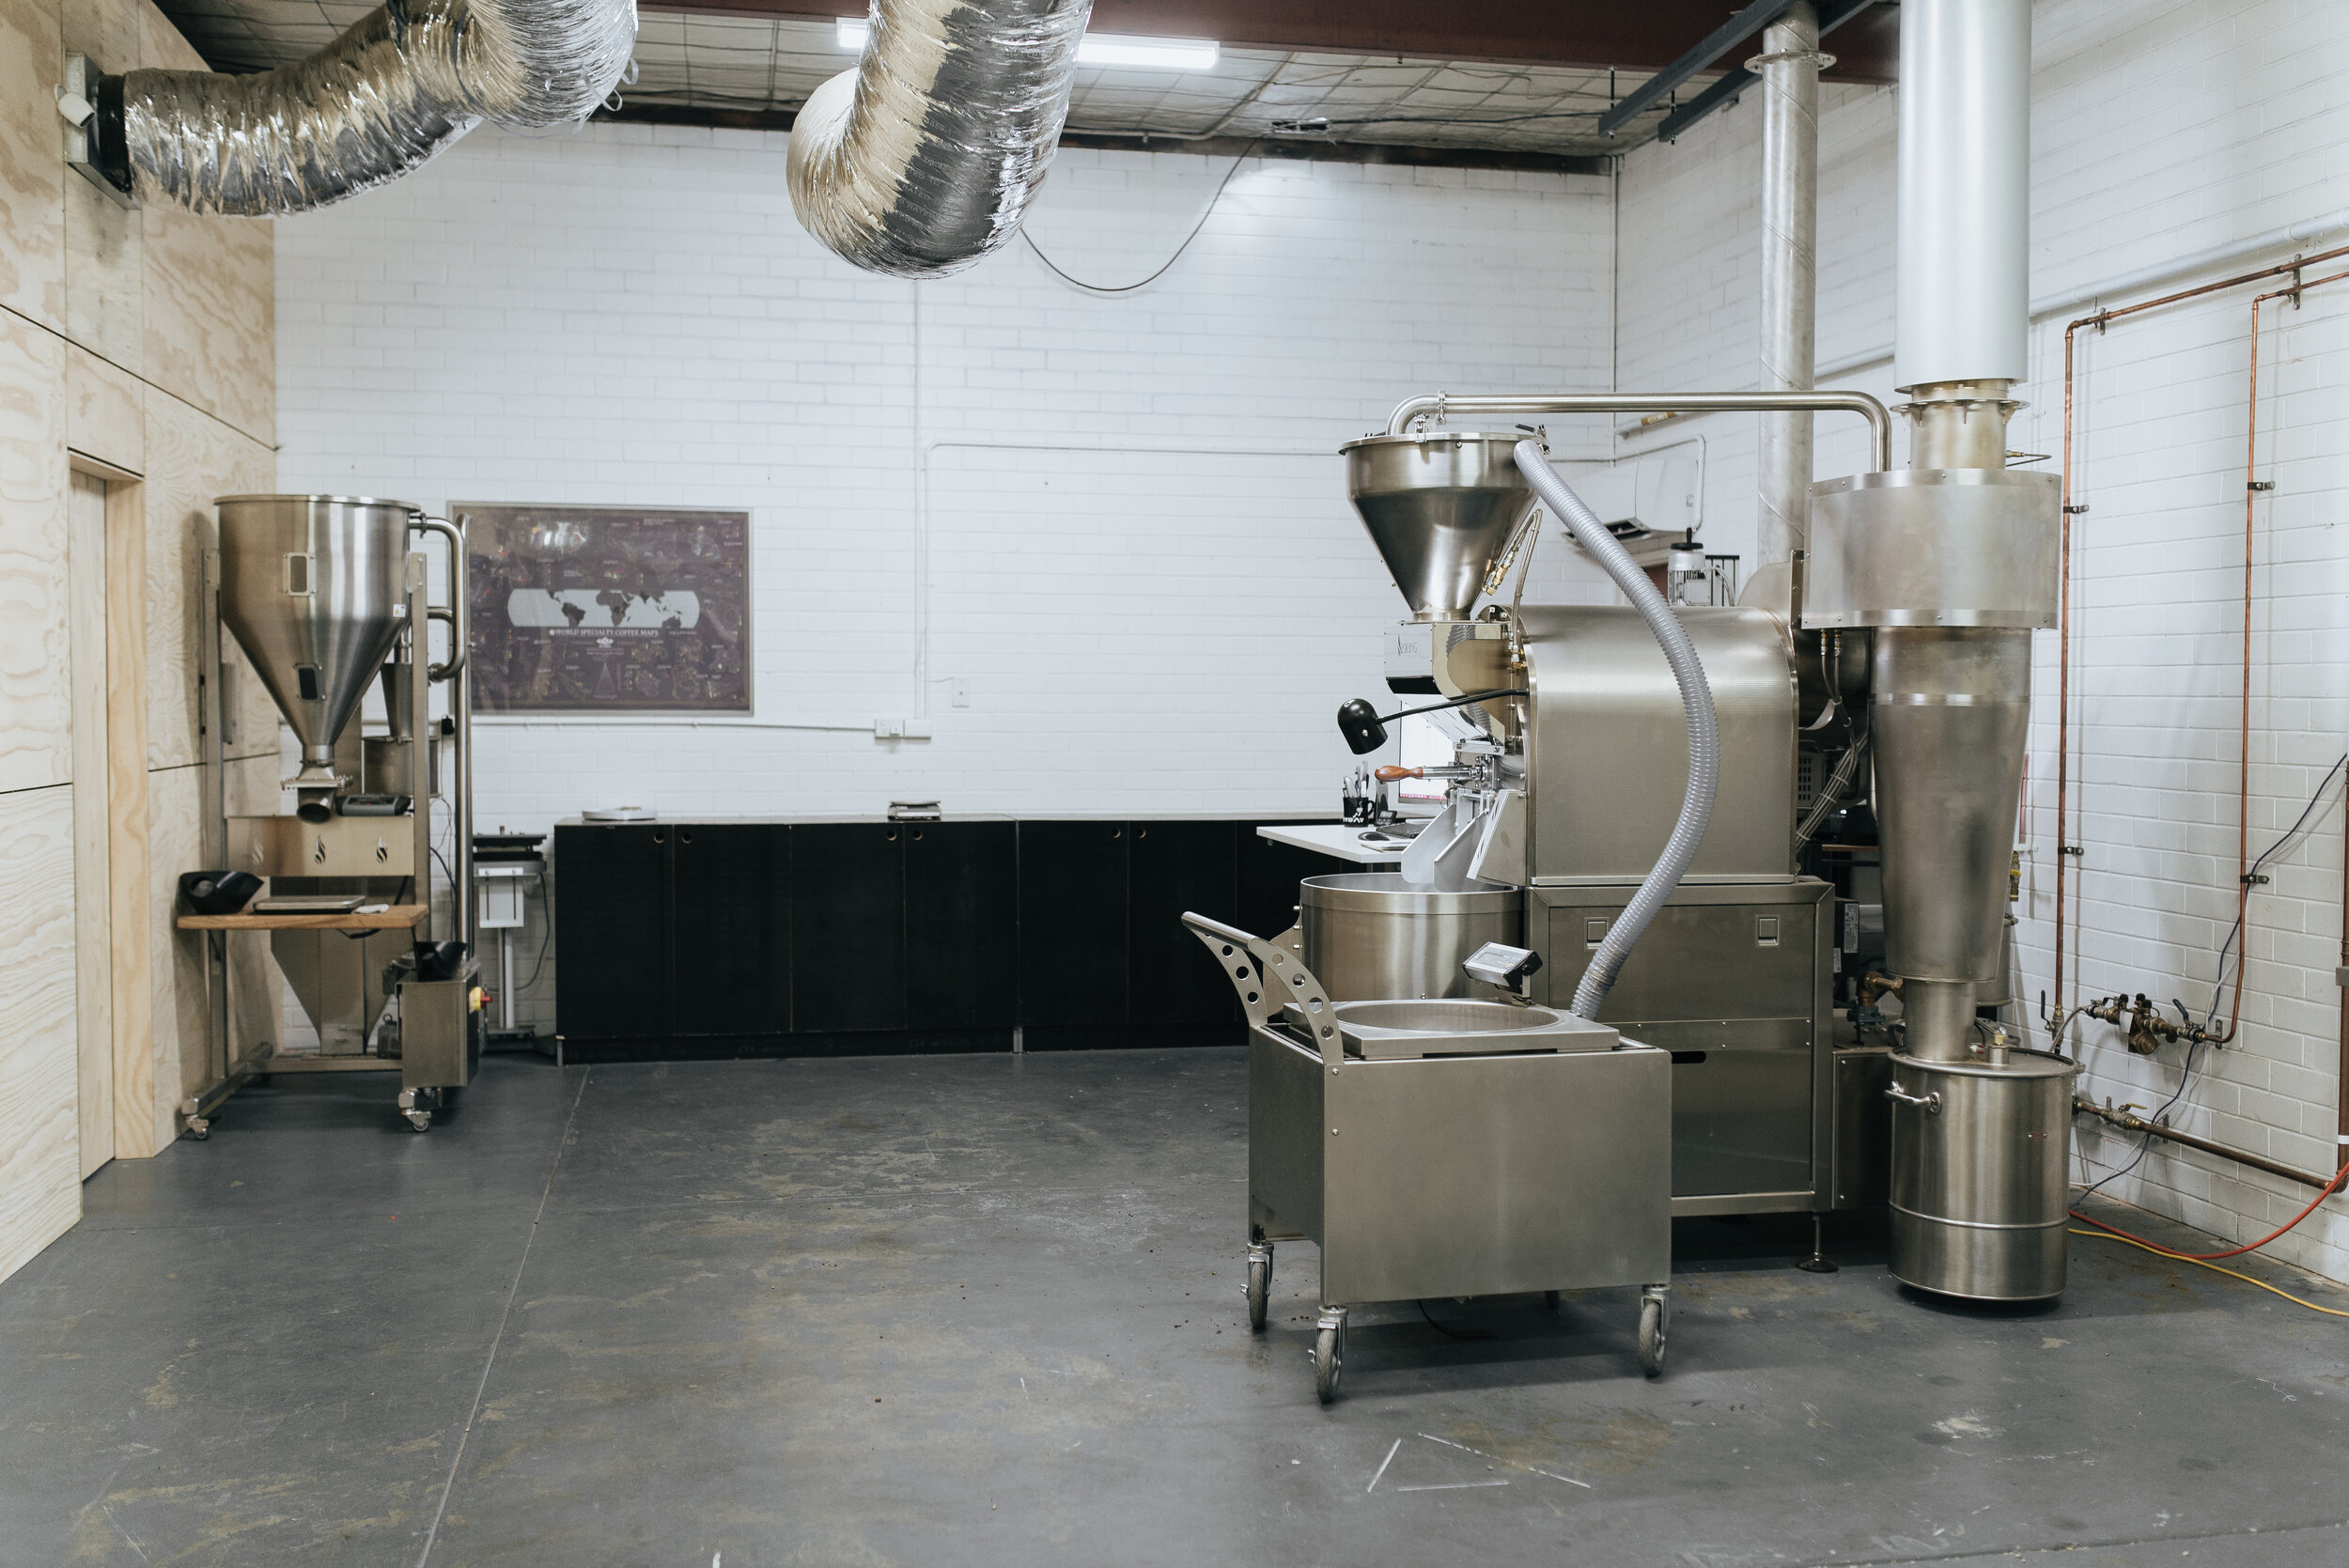 Modus’s shared roasting space. A blank canvas for aspiring coffee roasters.